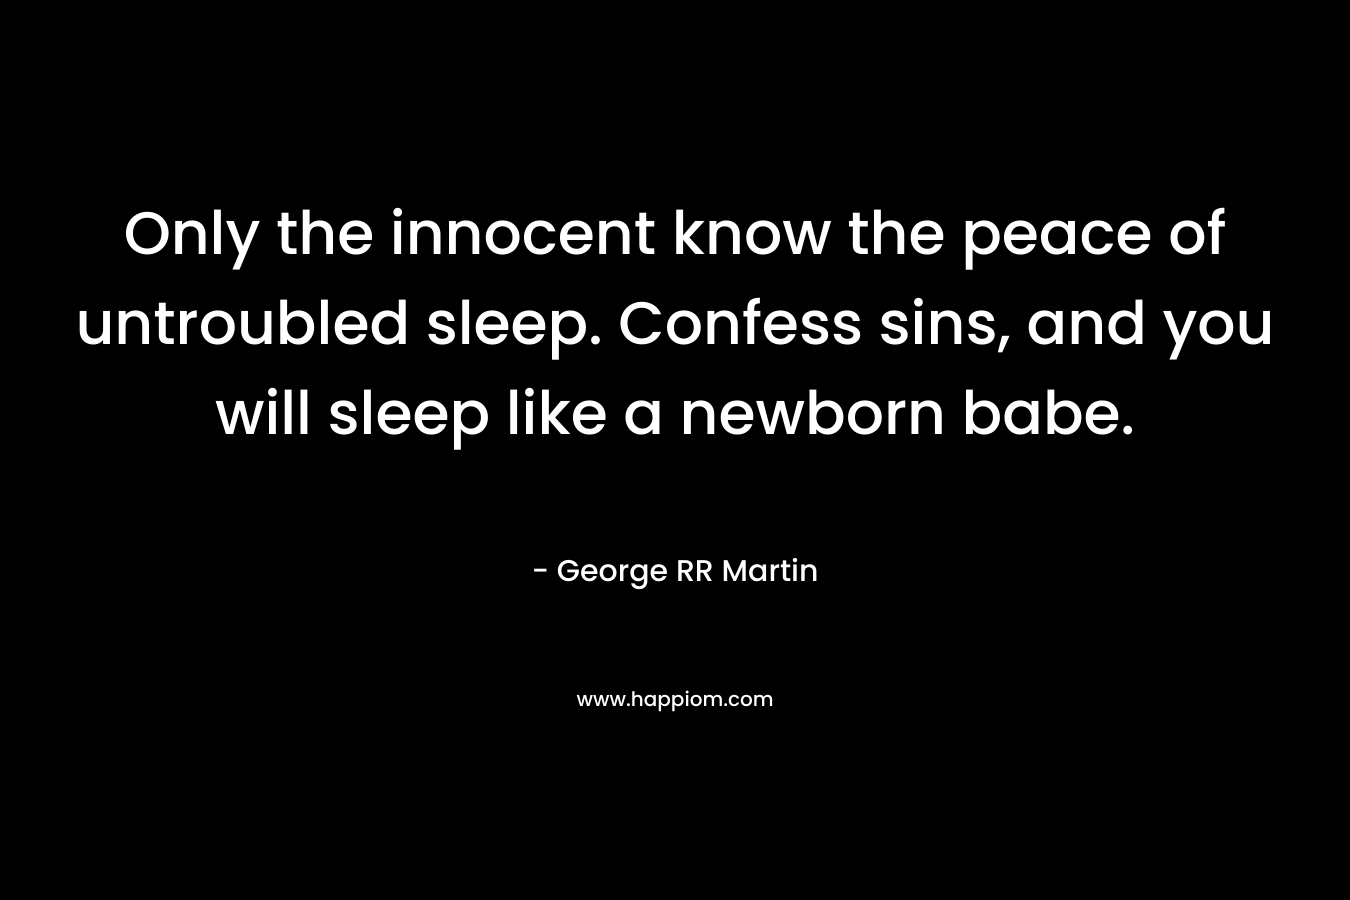 Only the innocent know the peace of untroubled sleep. Confess sins, and you will sleep like a newborn babe. – George RR Martin